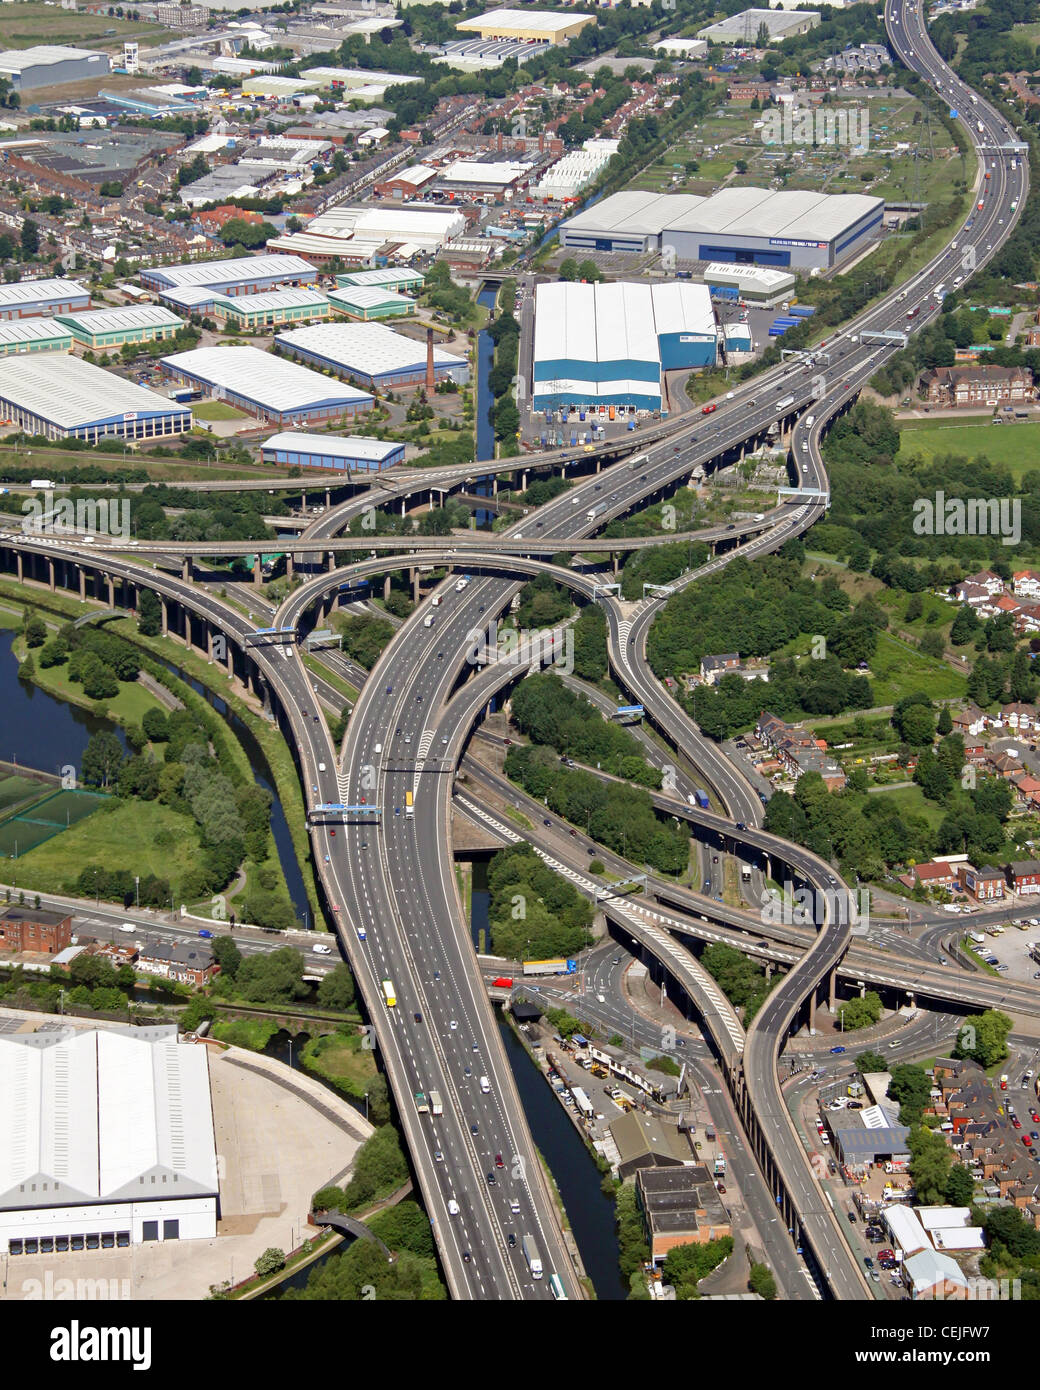 Aerial image of Spaghetti Junction M6 A38(M) road network Birmingham Stock Photo